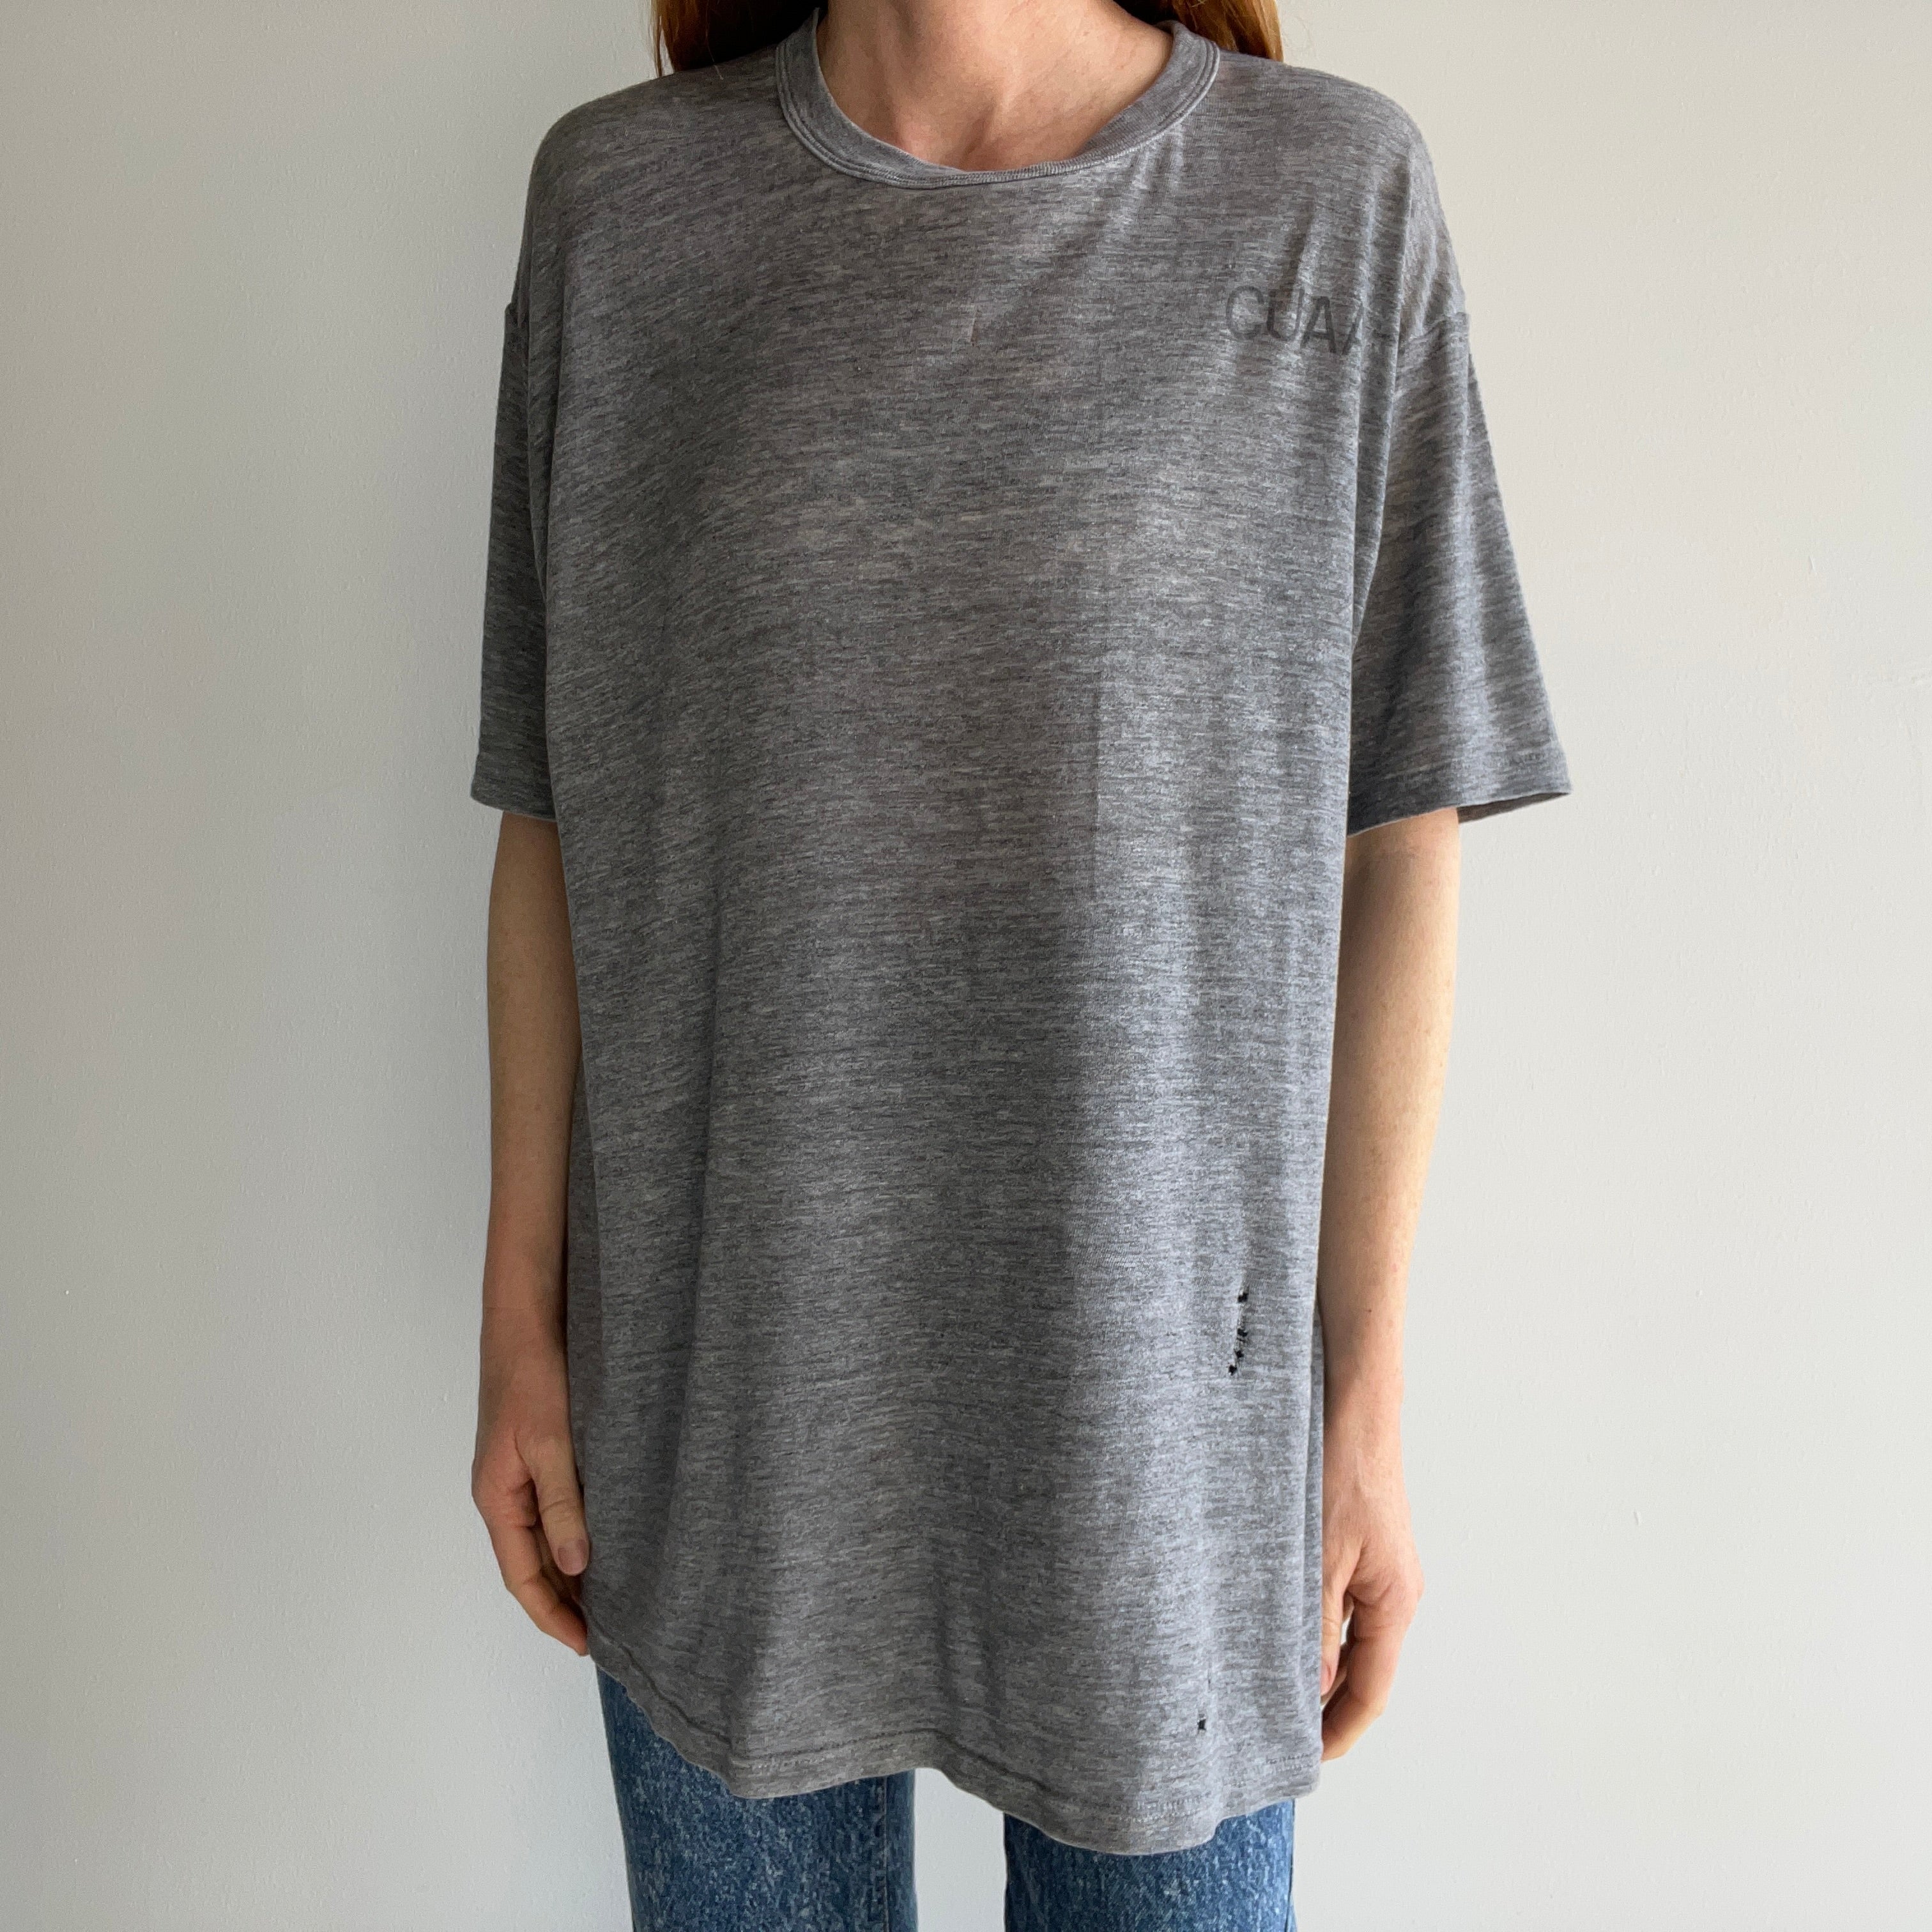 1980s Tissue Paper Thin WOrn Out Rolled Neck CUAA T-Shirt by Russell - OMFG